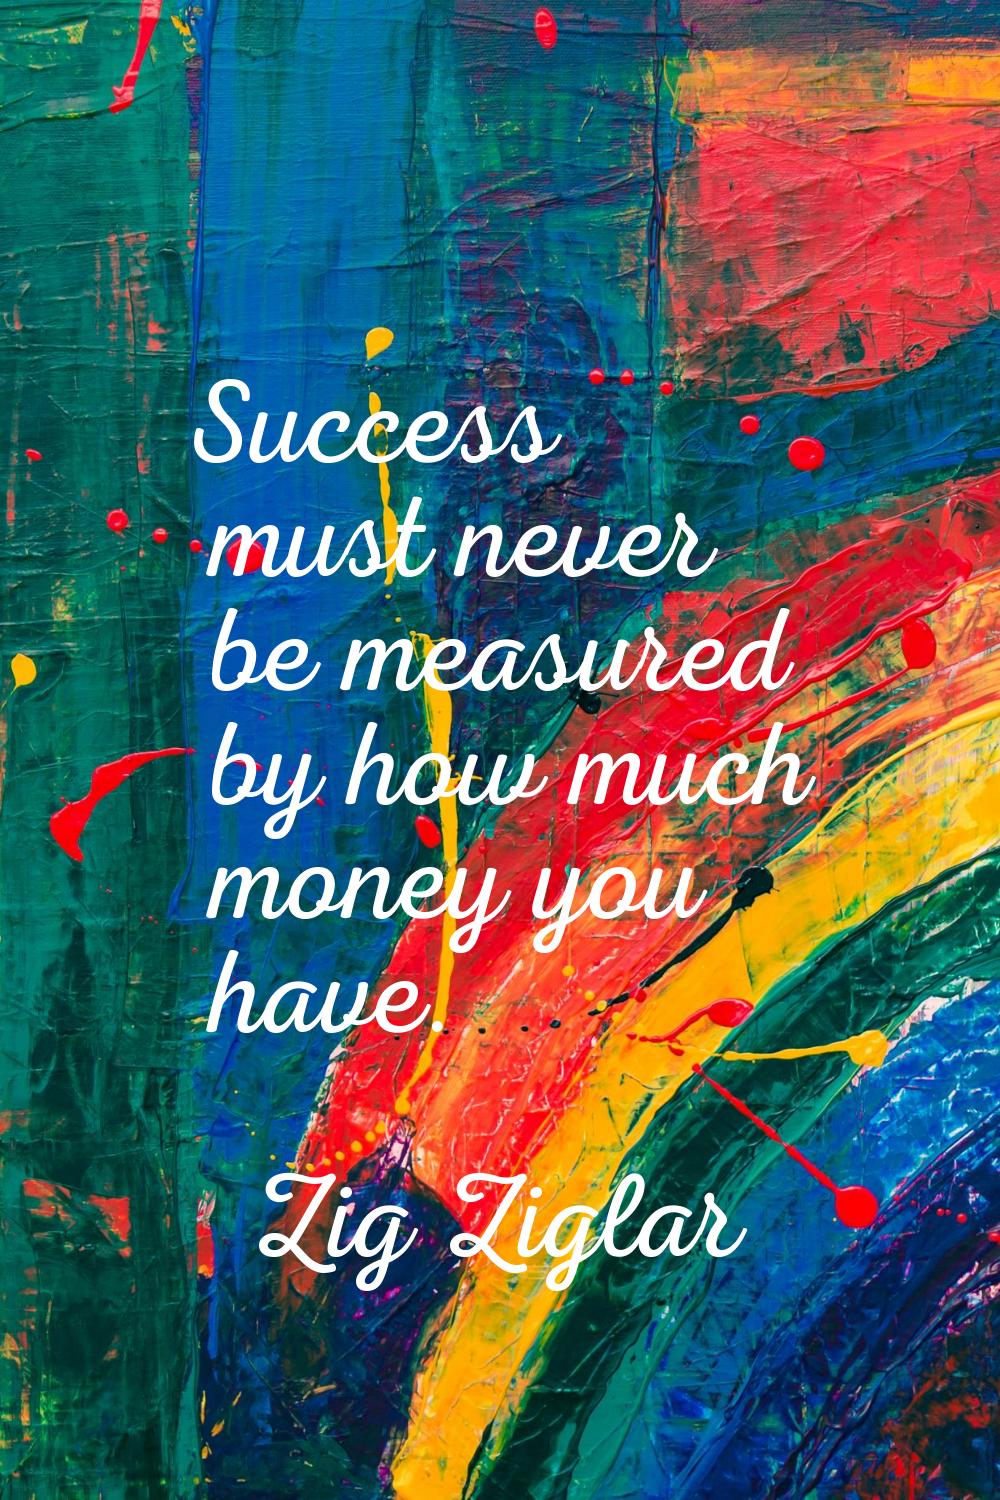 Success must never be measured by how much money you have.